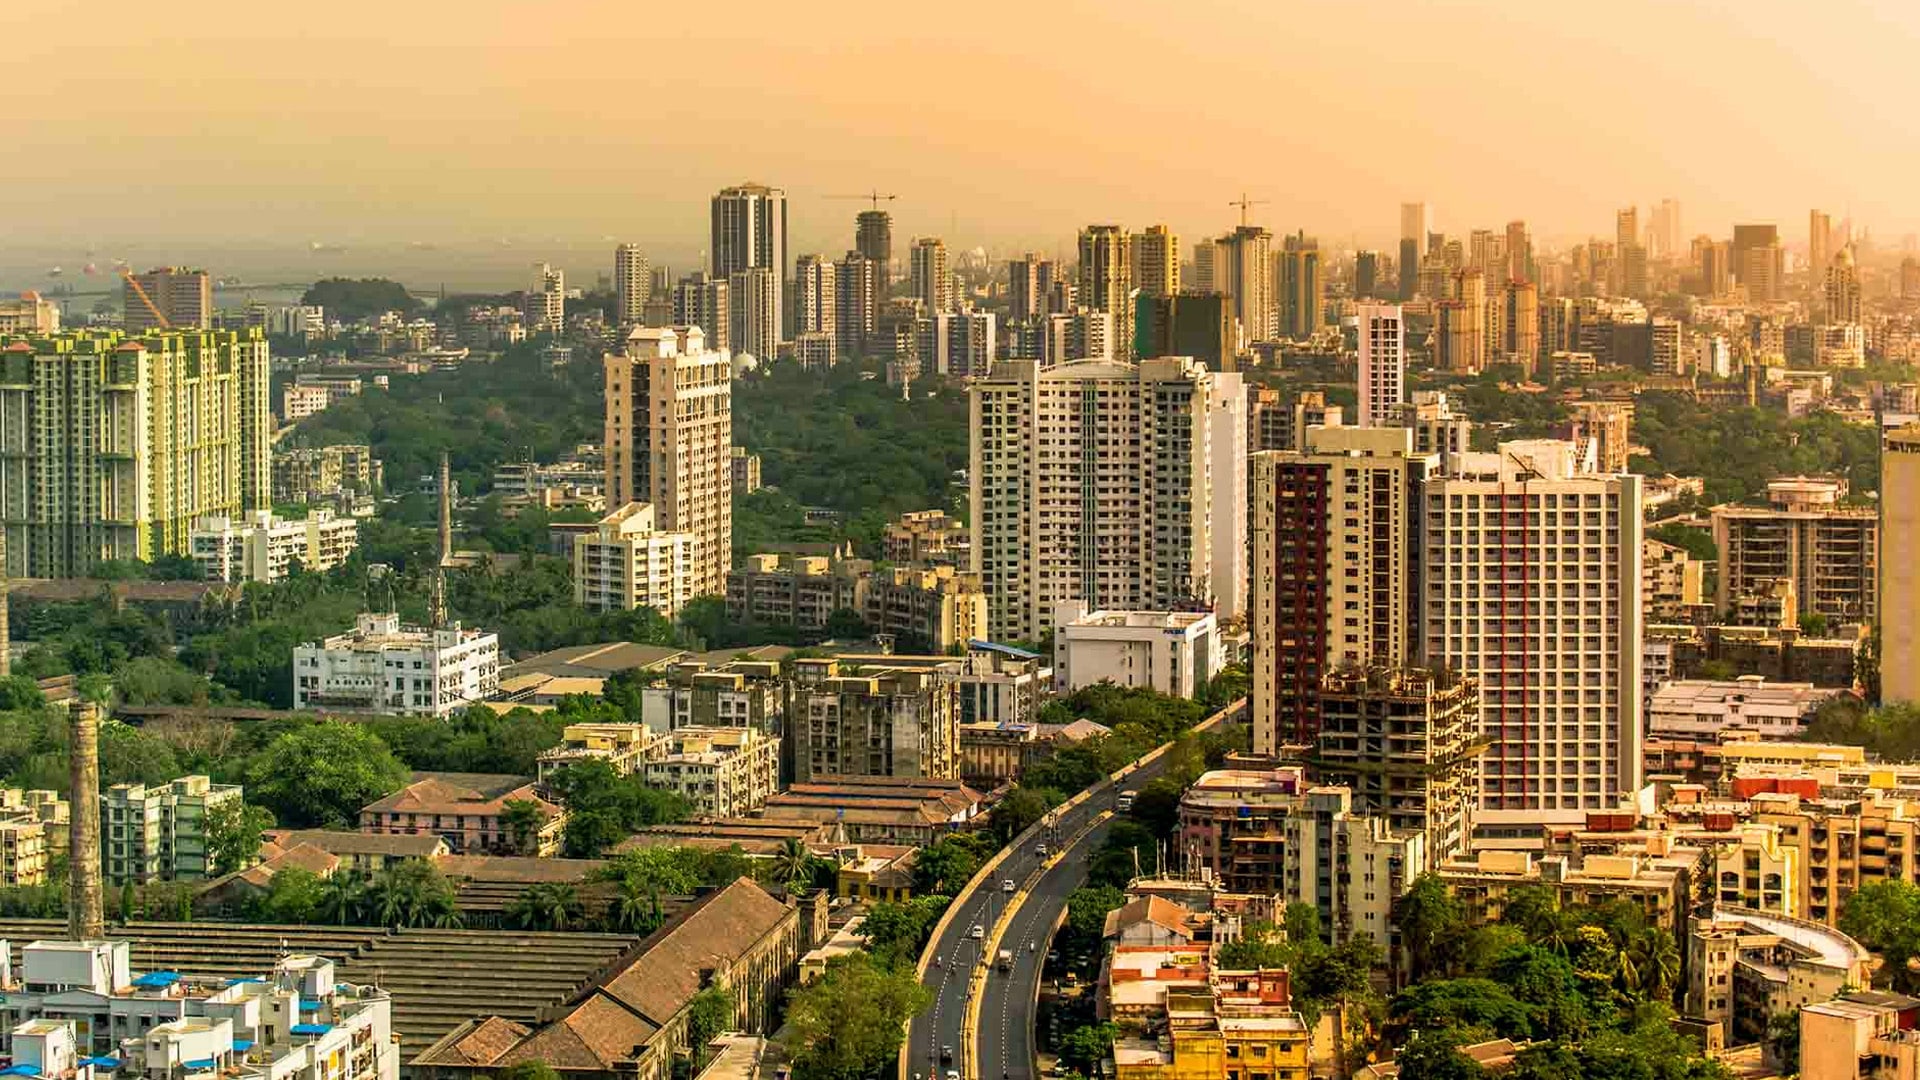 Foreign investment in Indian real estate jumps 3-fold to USD 23.9 bn during 2017-21: Report